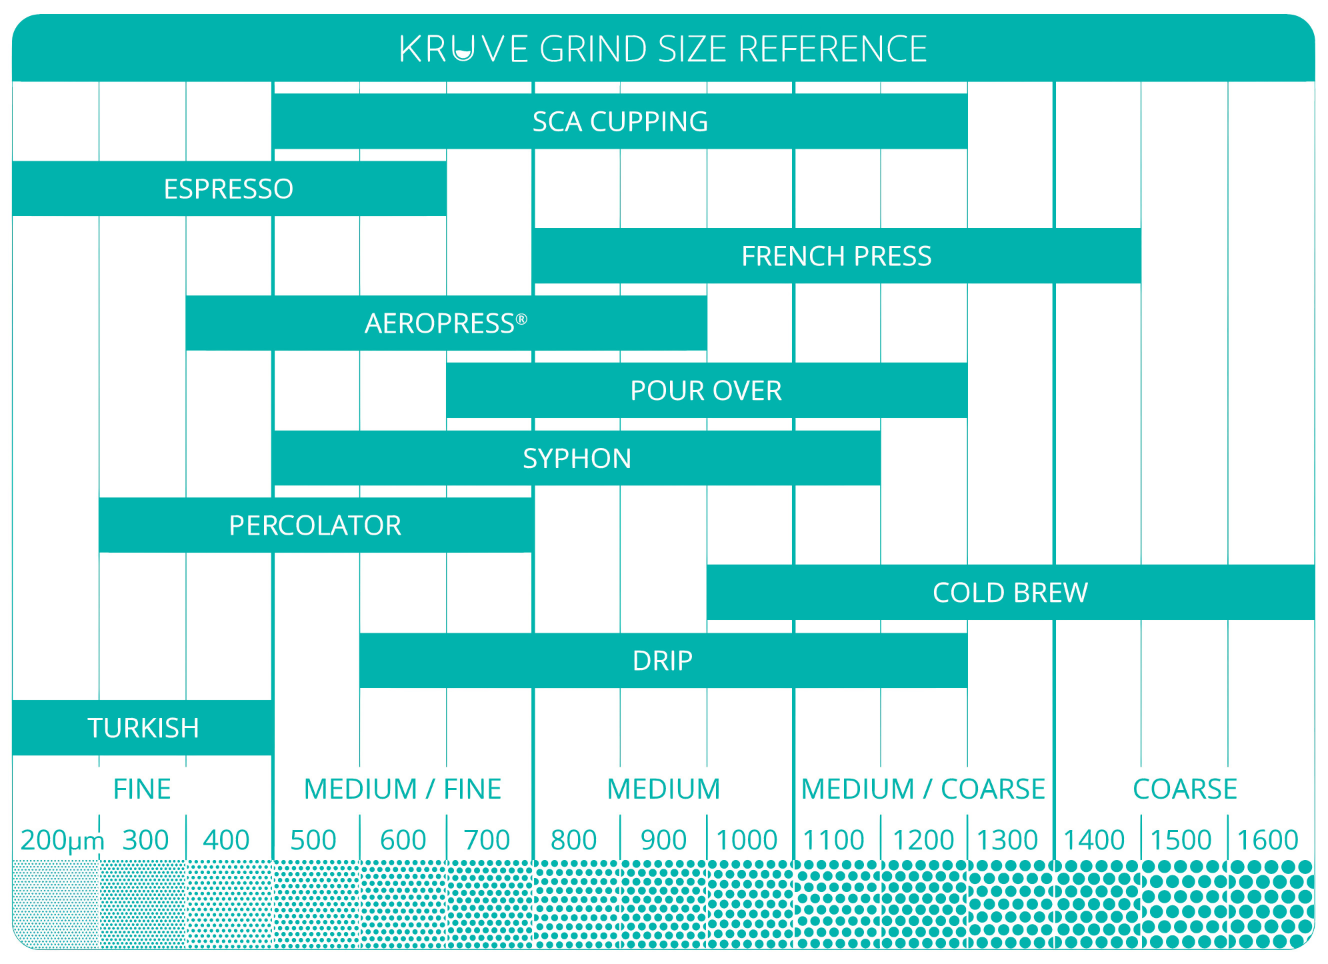 Kruve coffee grind size reference chart